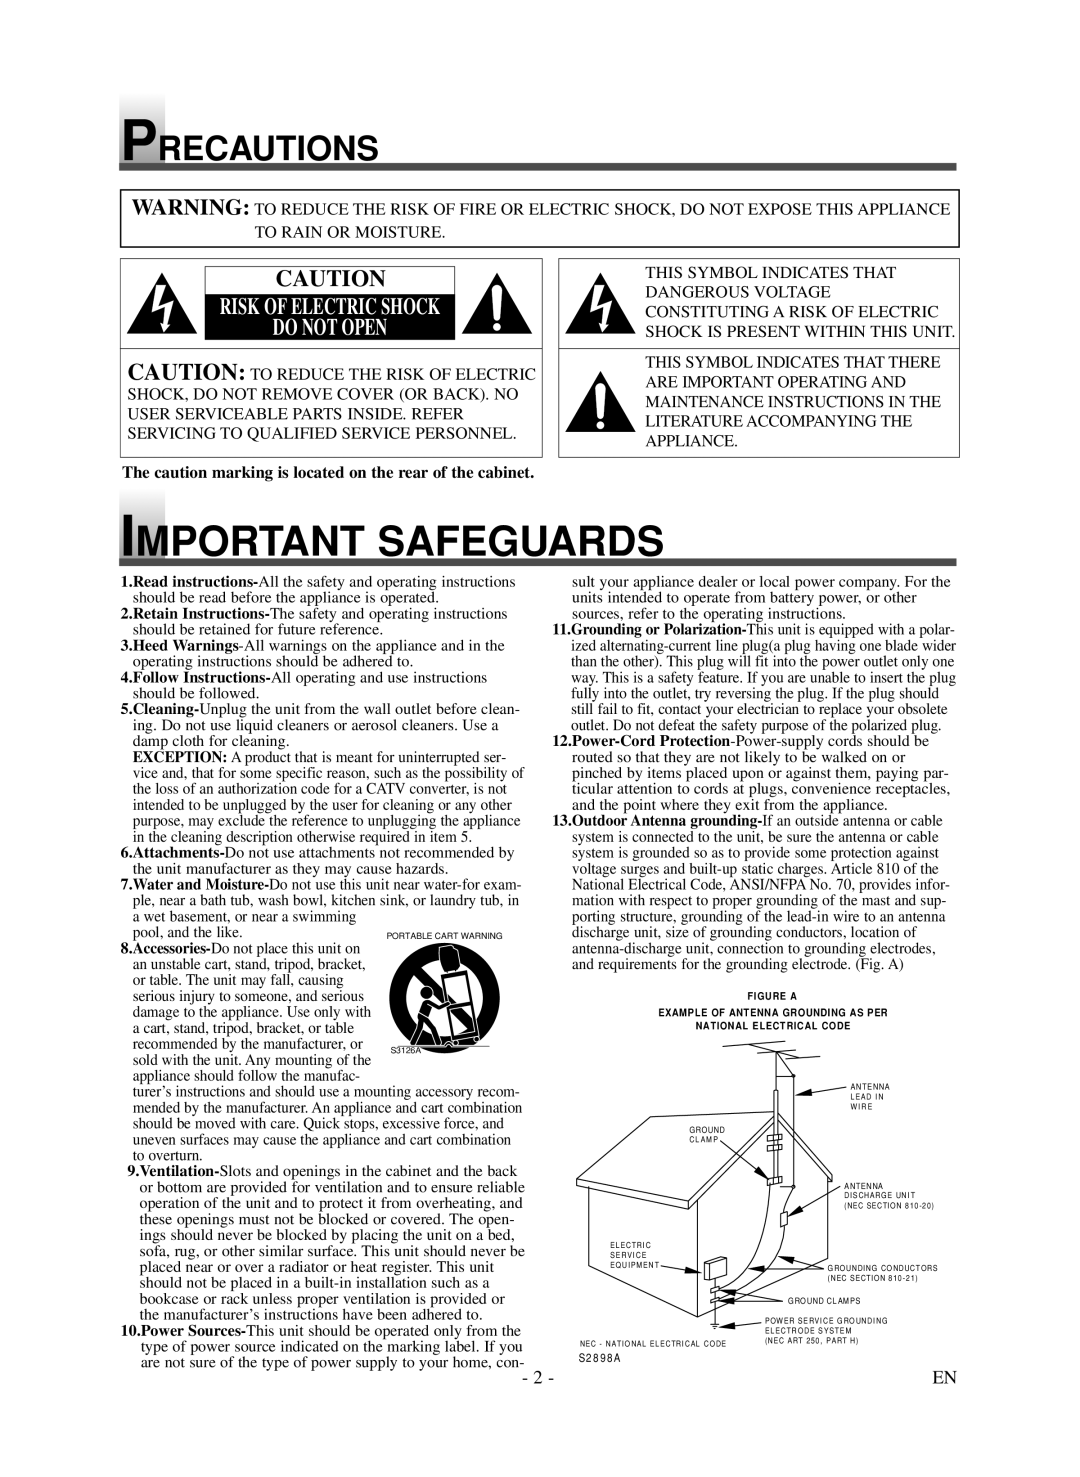 Symphonic LCD TV/DVD owner manual Precautions, Important Safeguards, Risk Of Electric Shock Do Not Open 